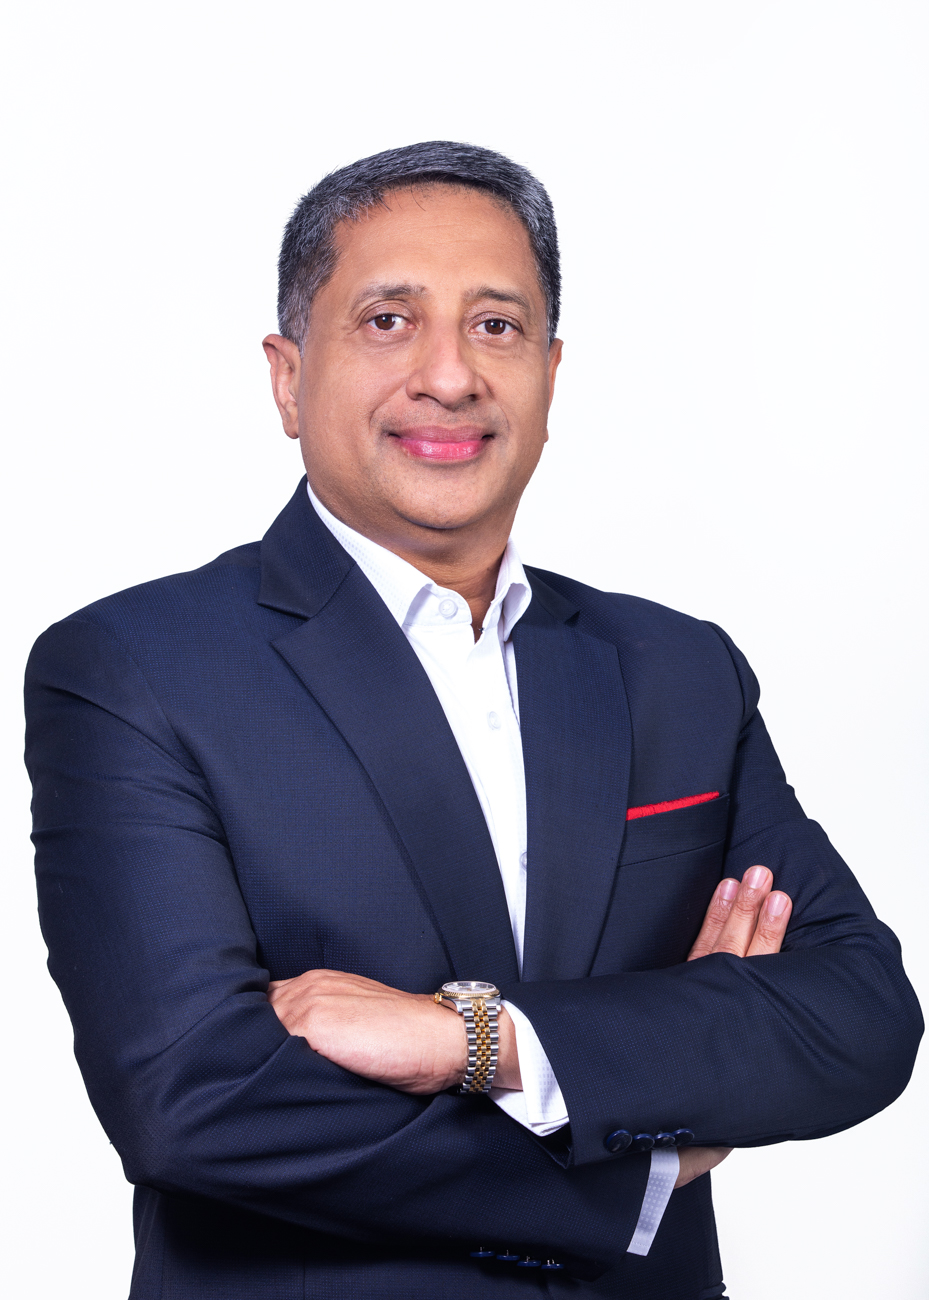 Vinay Malhotra, Regional Group Chief Operating Officer – South Asia, Middle East & North Africa and Americas, VFS Global